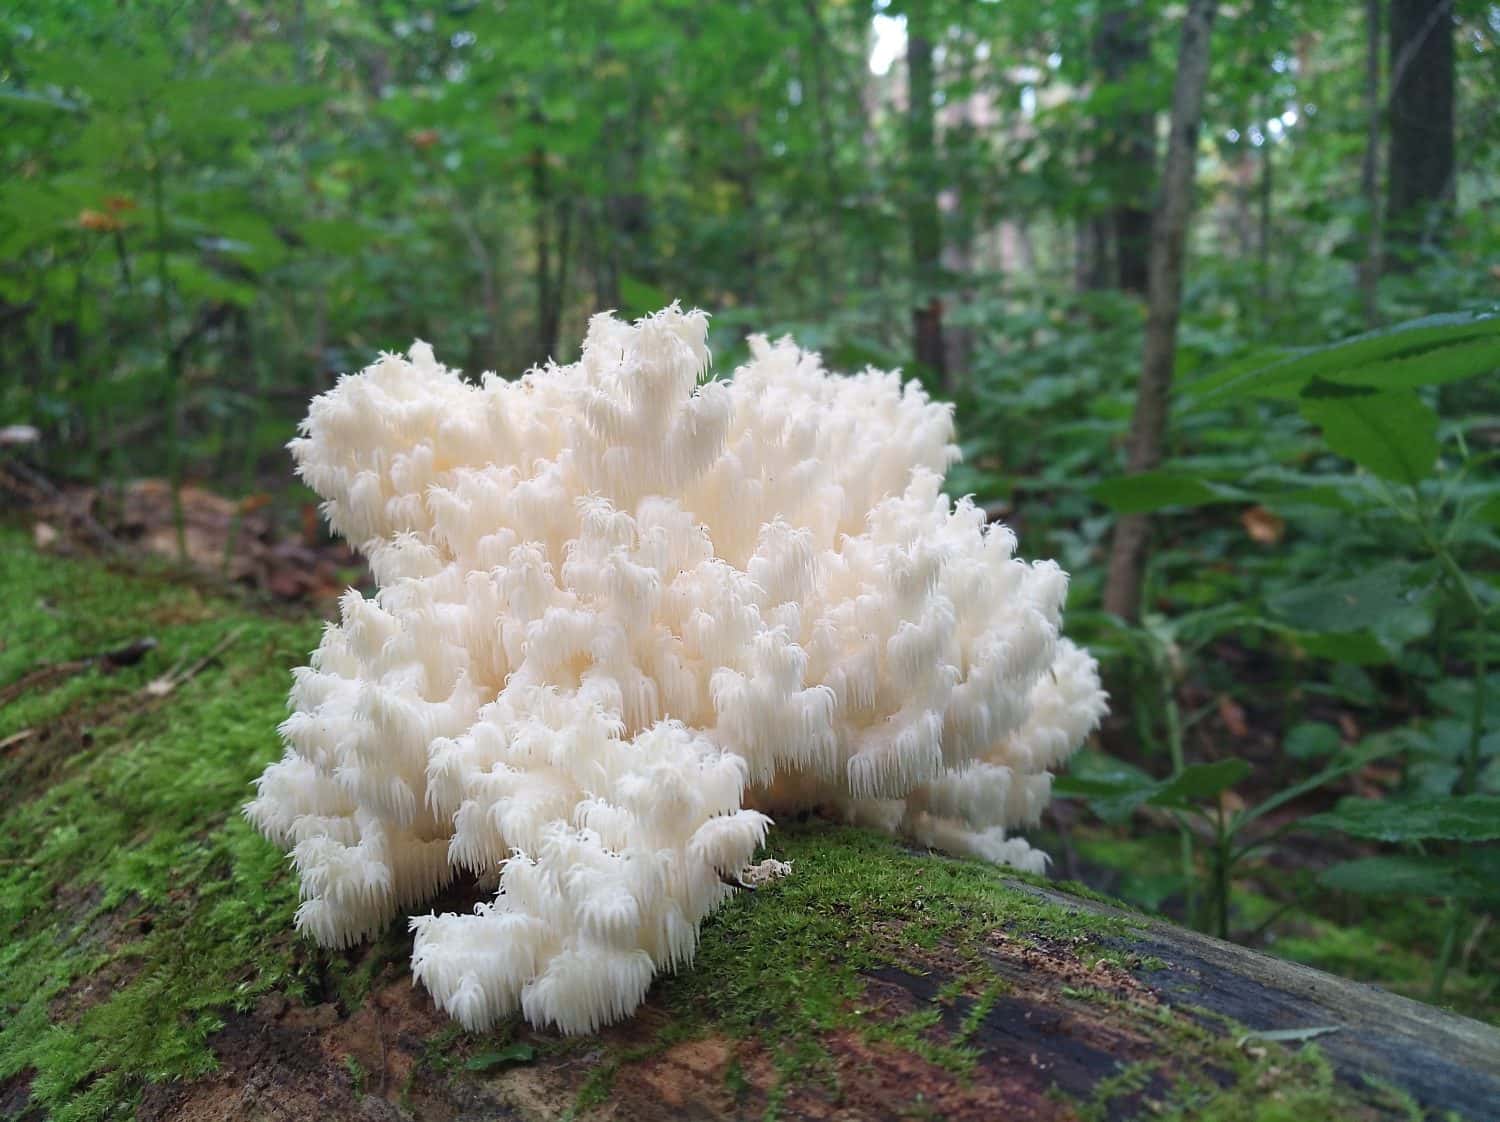 The coral fungus grows on the old stump among the moss. A secluded corner of a deciduous forest.